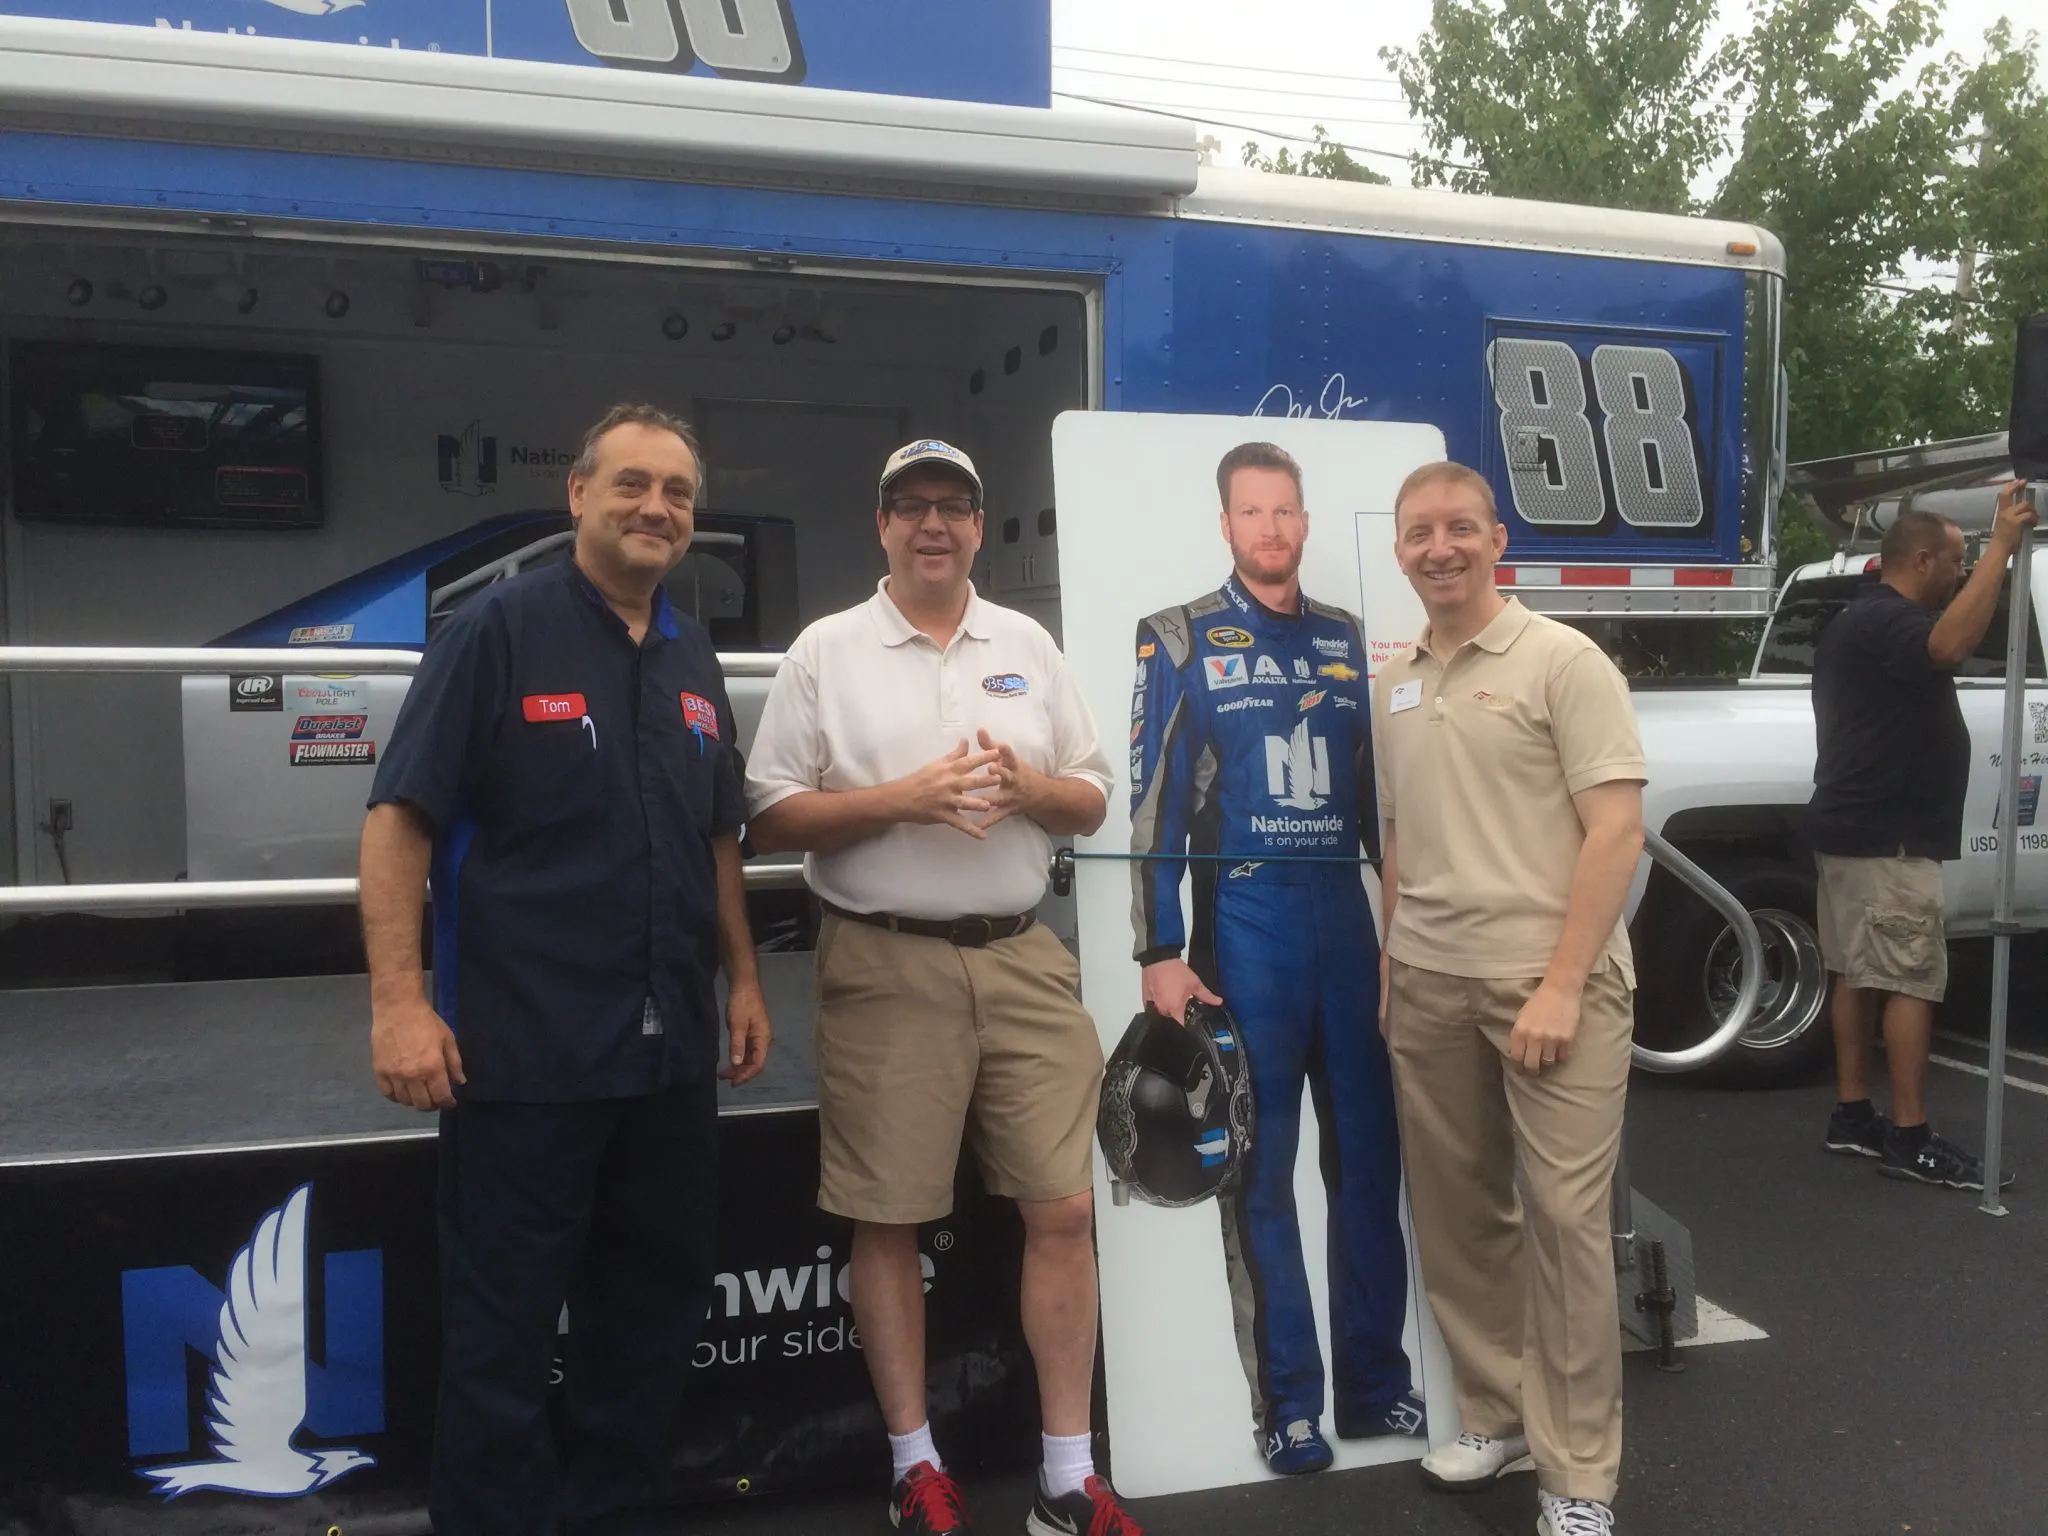 Tom Sforza, Chuck Seese, Dale Earnhardt Jr. cut-out and Mike Frailey Standing in front of the NATIONWIDE NO. 88 Chevrolet Show Car